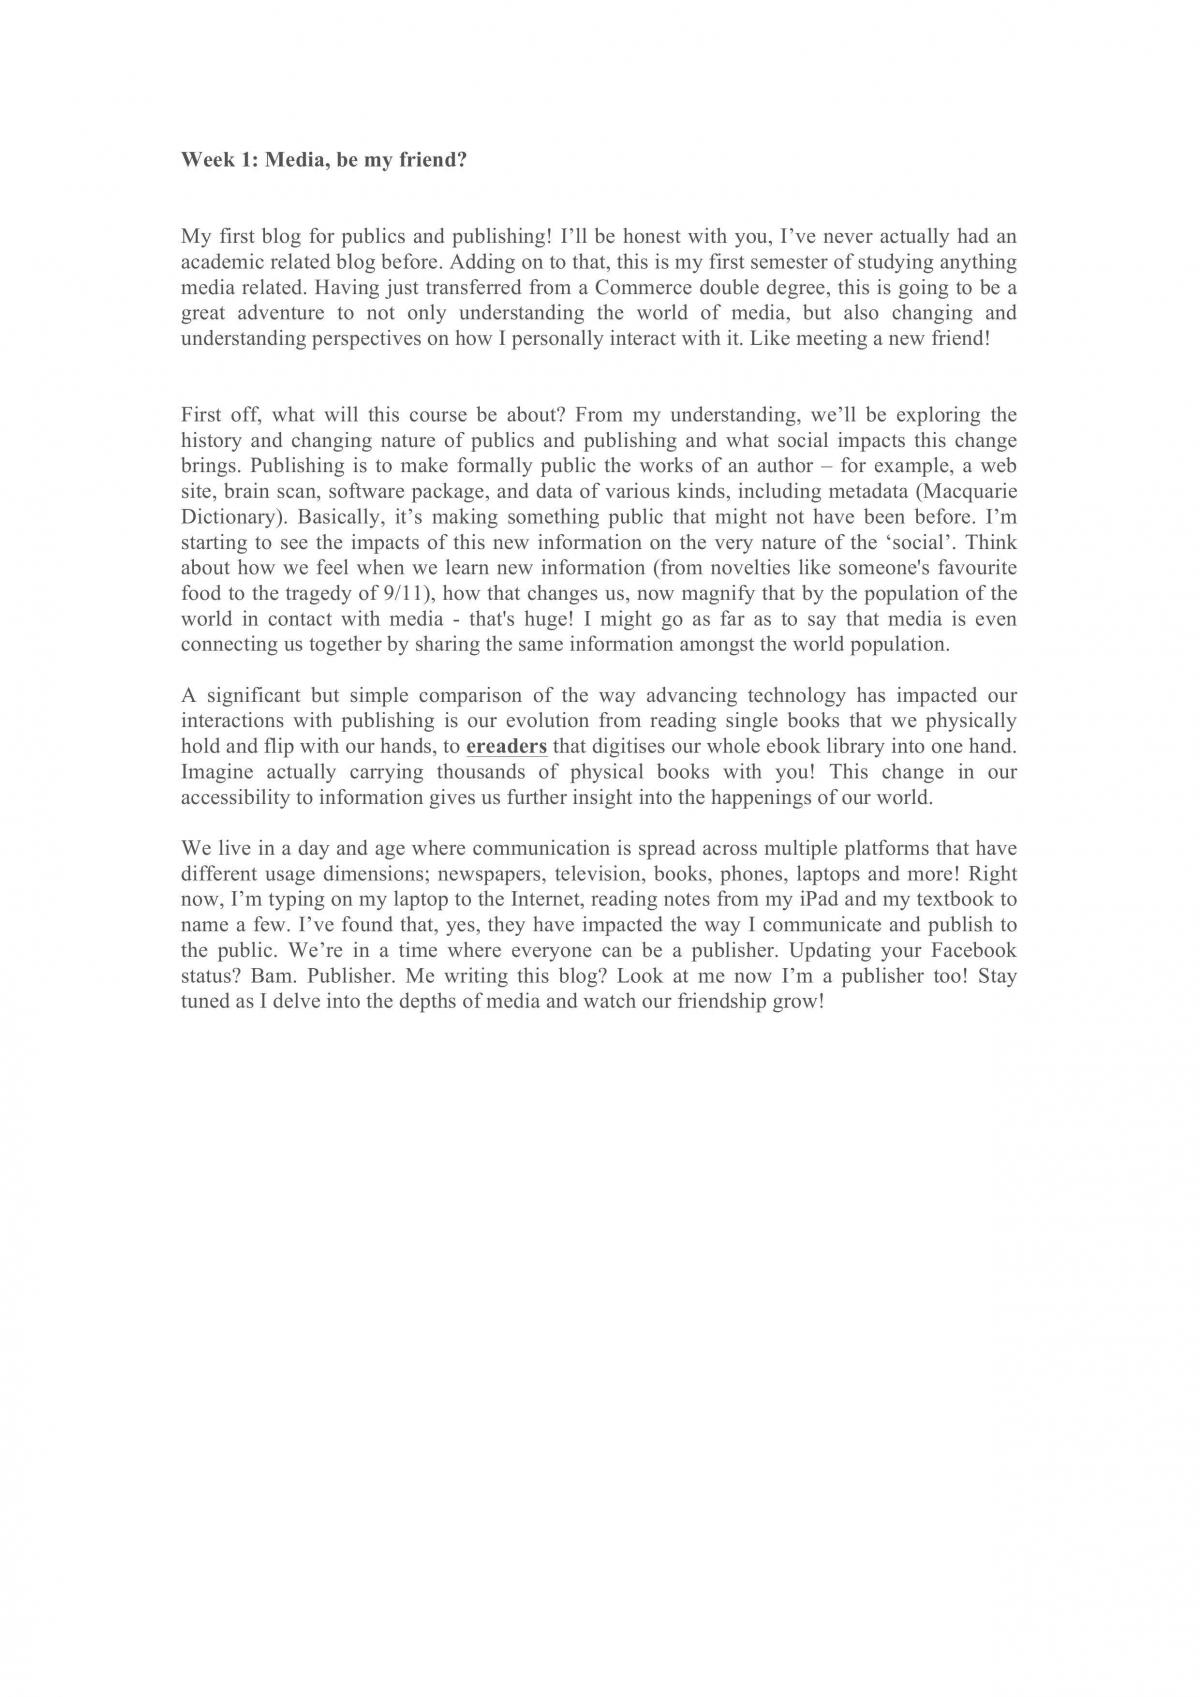 Weeks 1-3 (Advancing Media, Communications Revolution, Collecting People Together) - Page 1